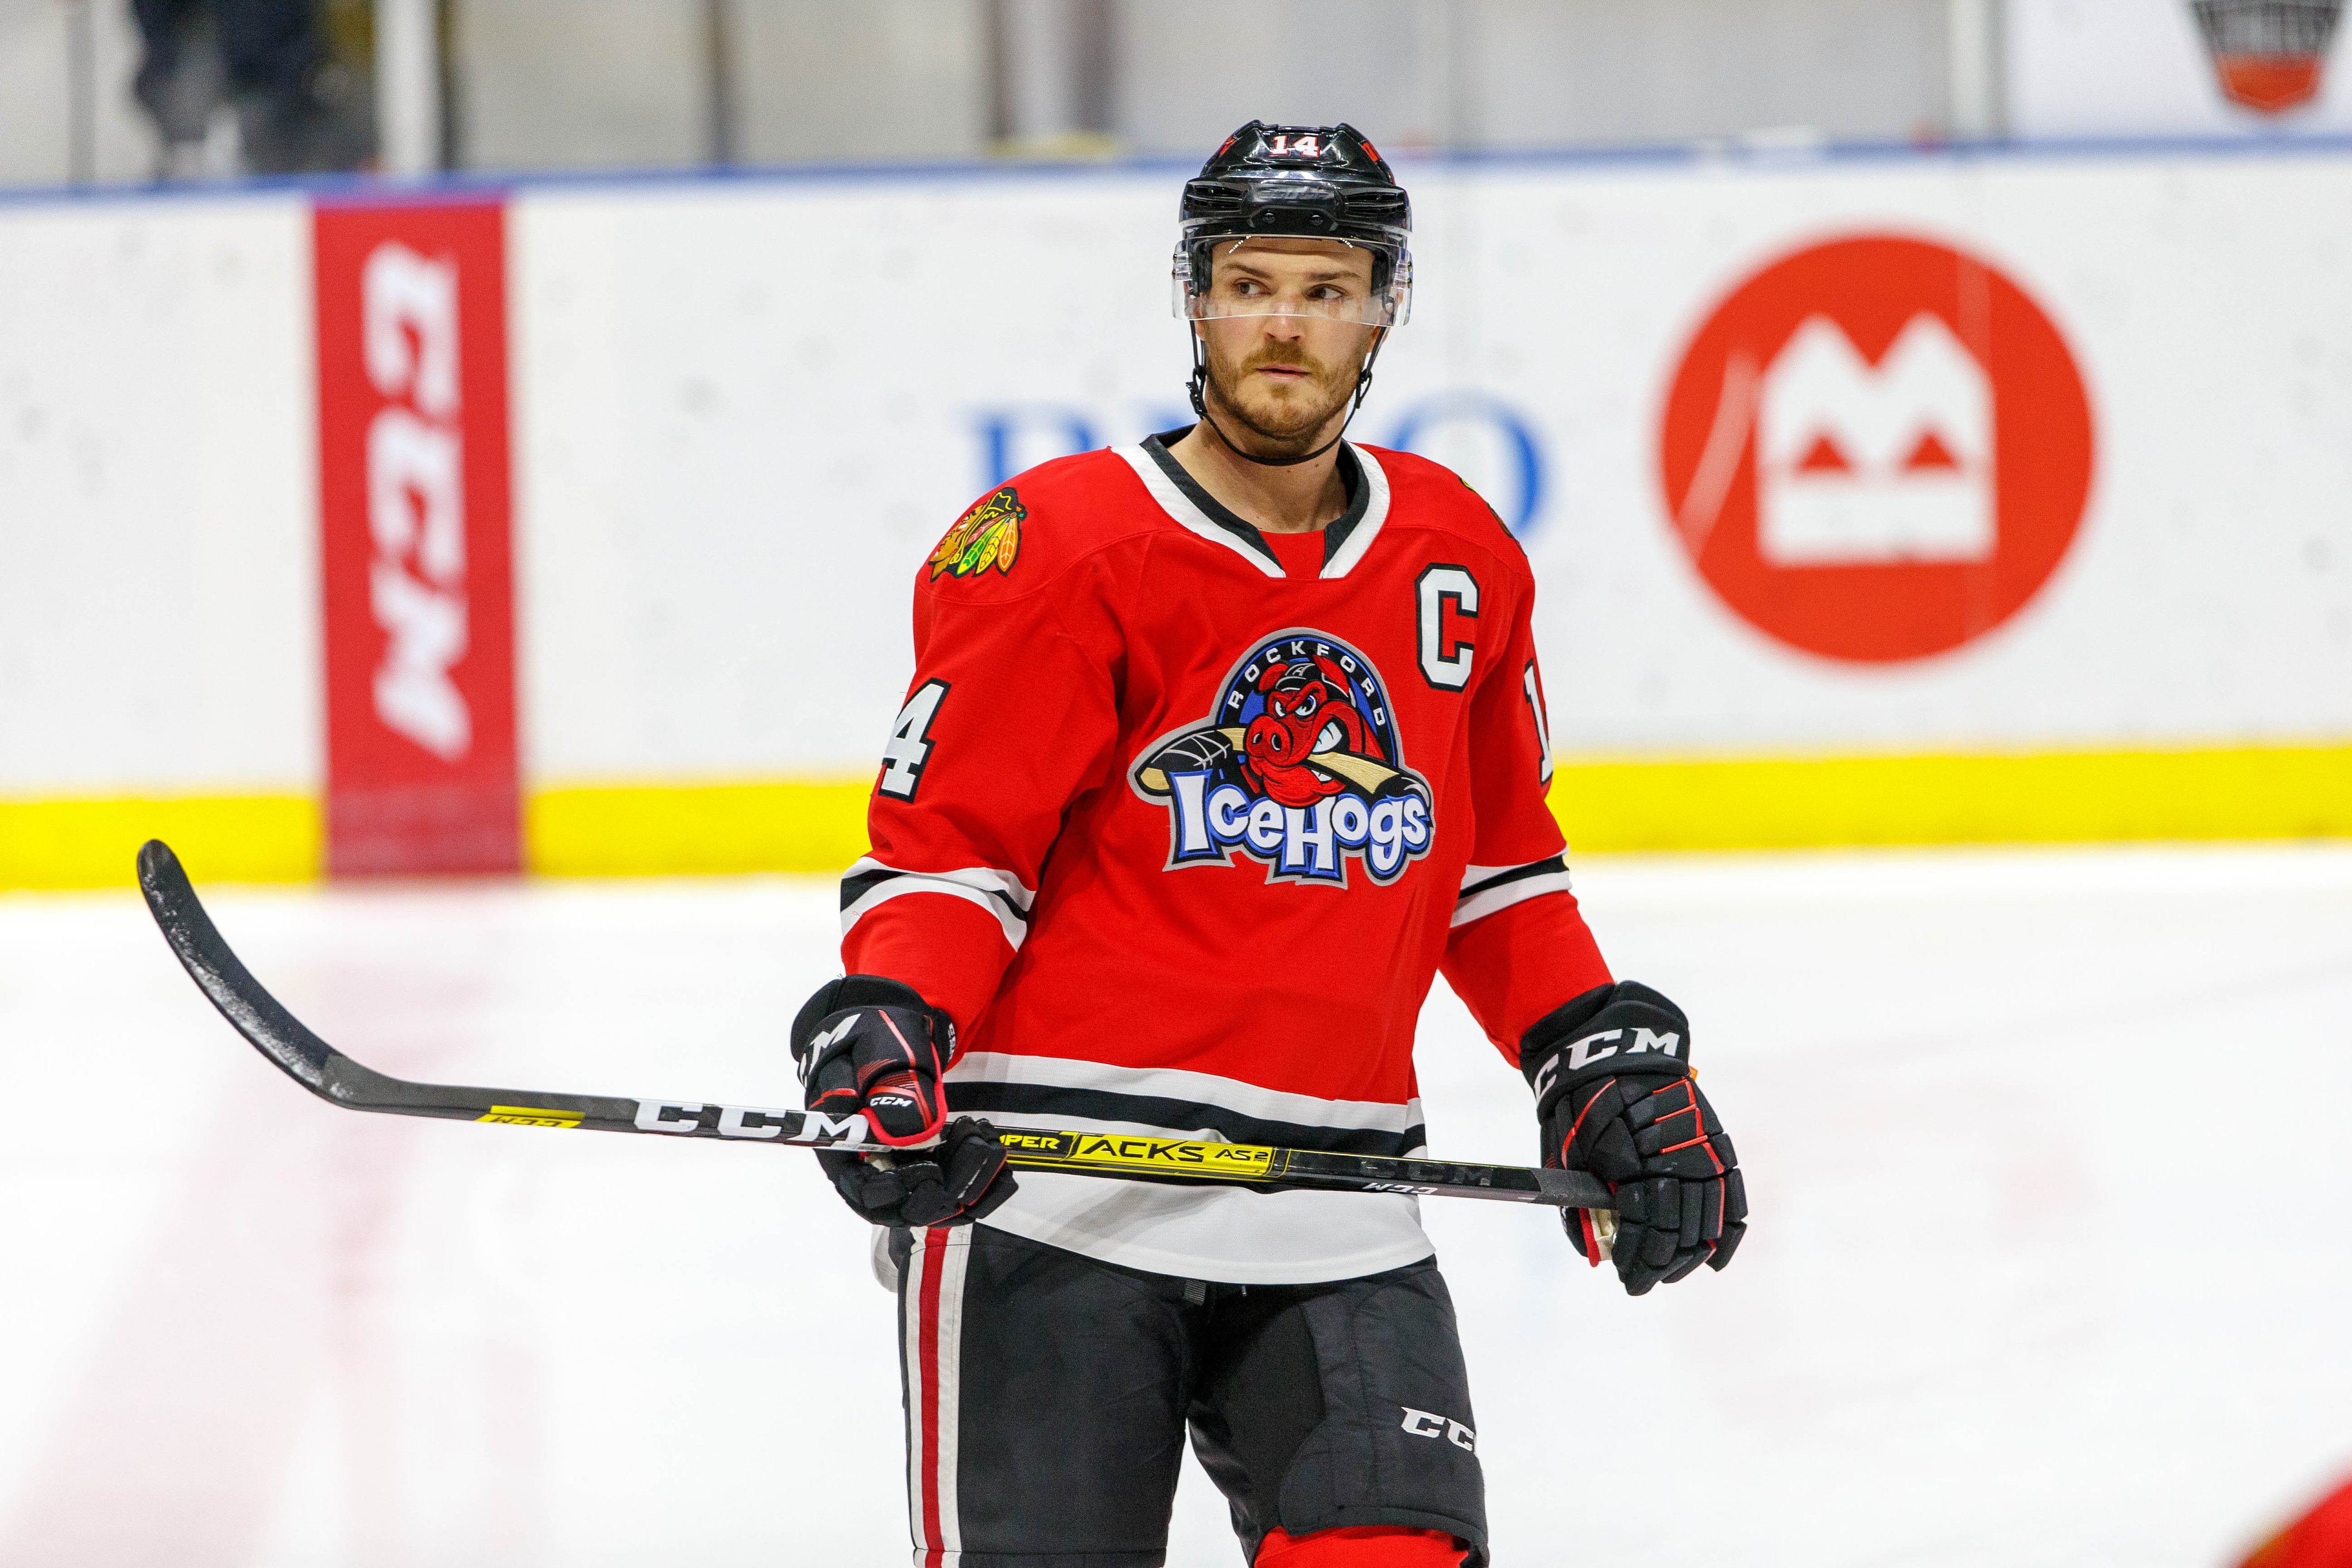 Rockford IceHogs on X: ICYMI, the 2022-23 schedule came out this